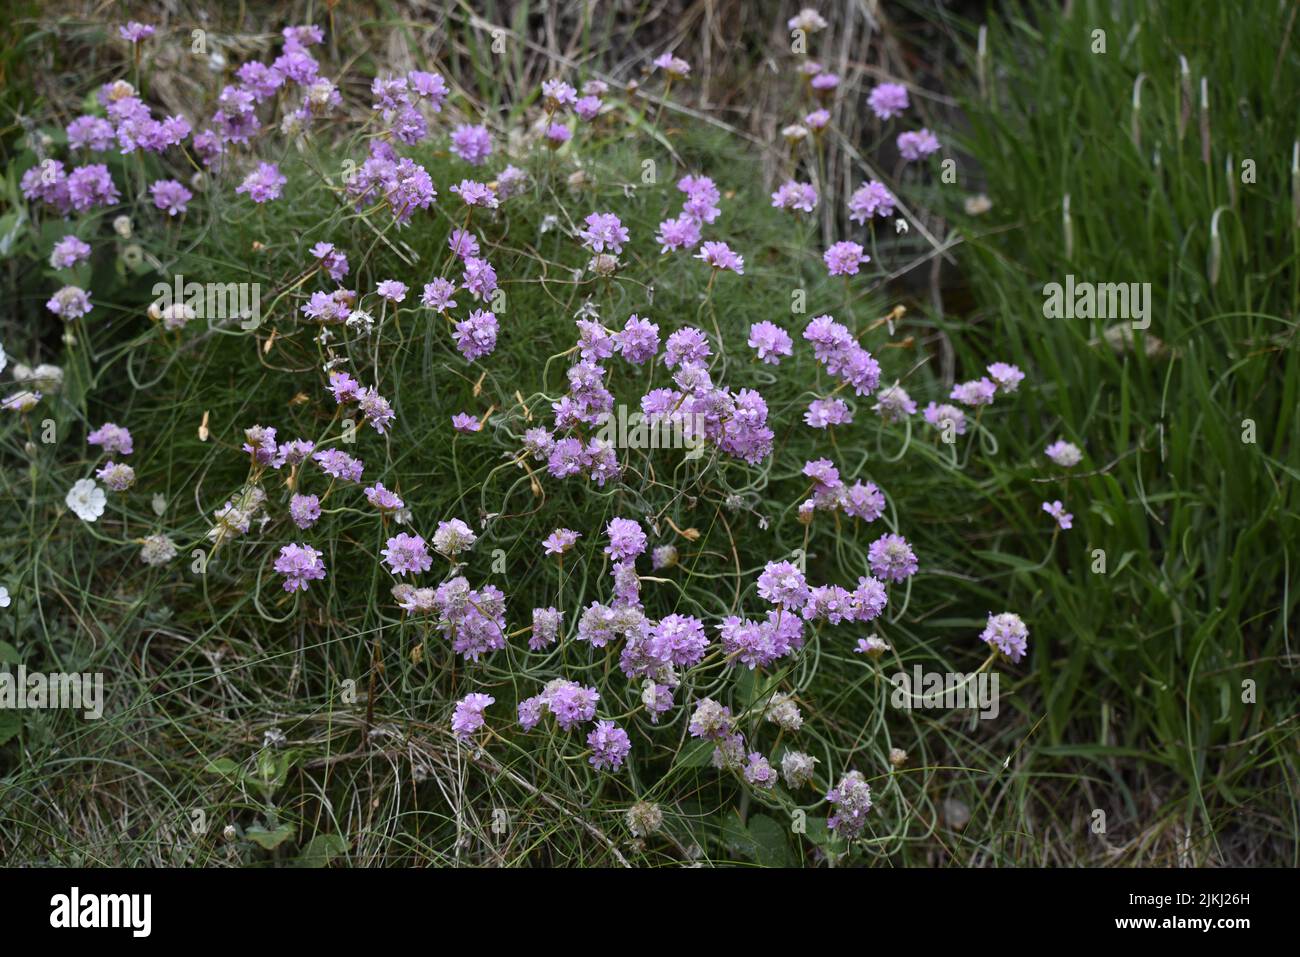 Dense Pink Carpet of Thrift (Armeria maritima) in Foreground of Image, against a Green Grass Background, on the Isle of Man, UK in Spring Stock Photo